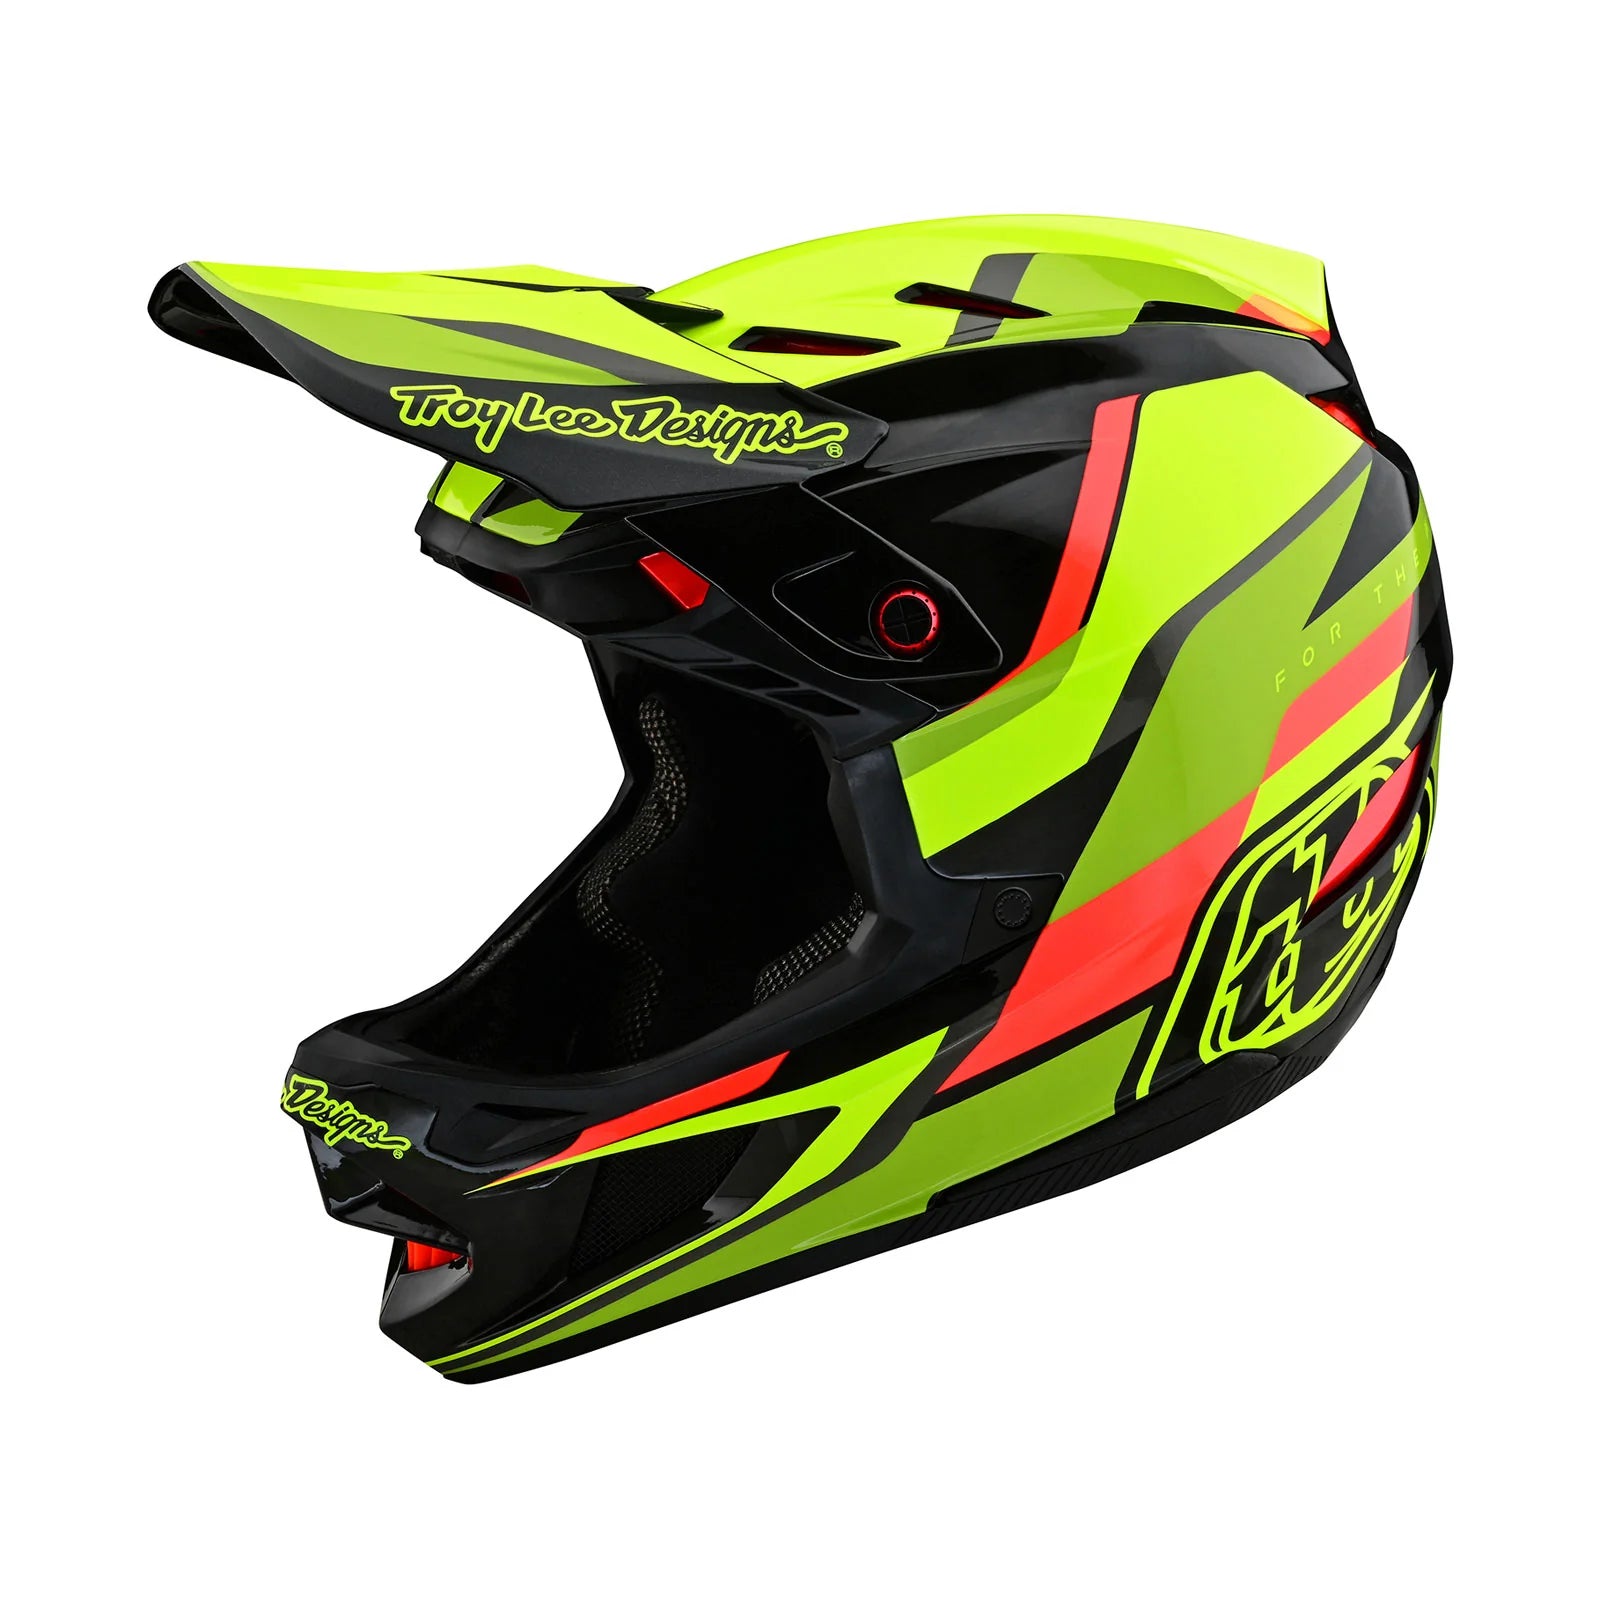 A TLD D4 Carbon AS Helmet W/MIPS Omega Black / Yellow with a yellow and neon design.